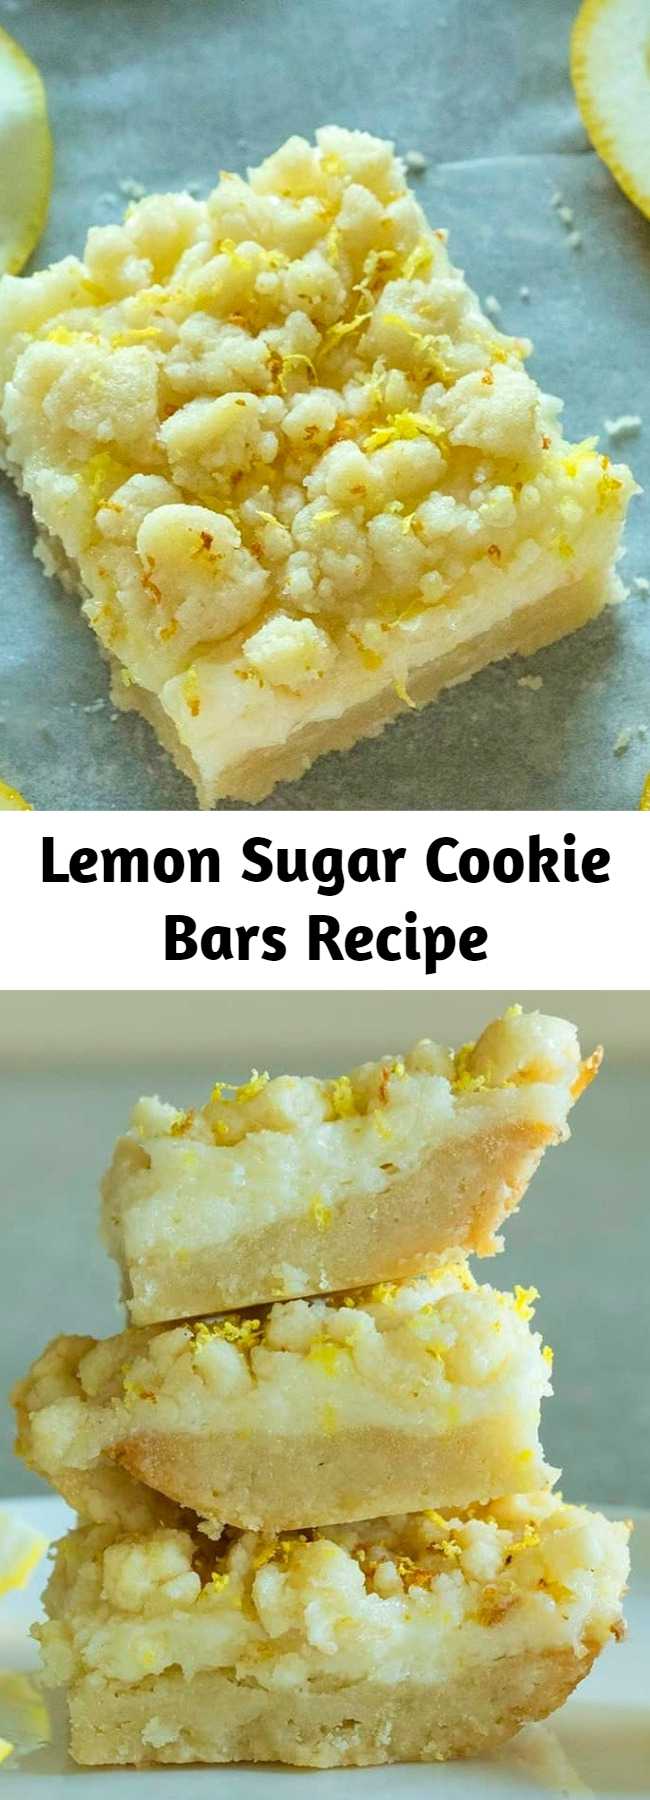 Lemon Sugar Cookie Bars Recipe - These easy lemon bars have a sweet sugar cookie crust topped with a tangy lemon cheesecake filling and then topped with more sugar cookie crumble. The perfect balance of sweet and tangy.